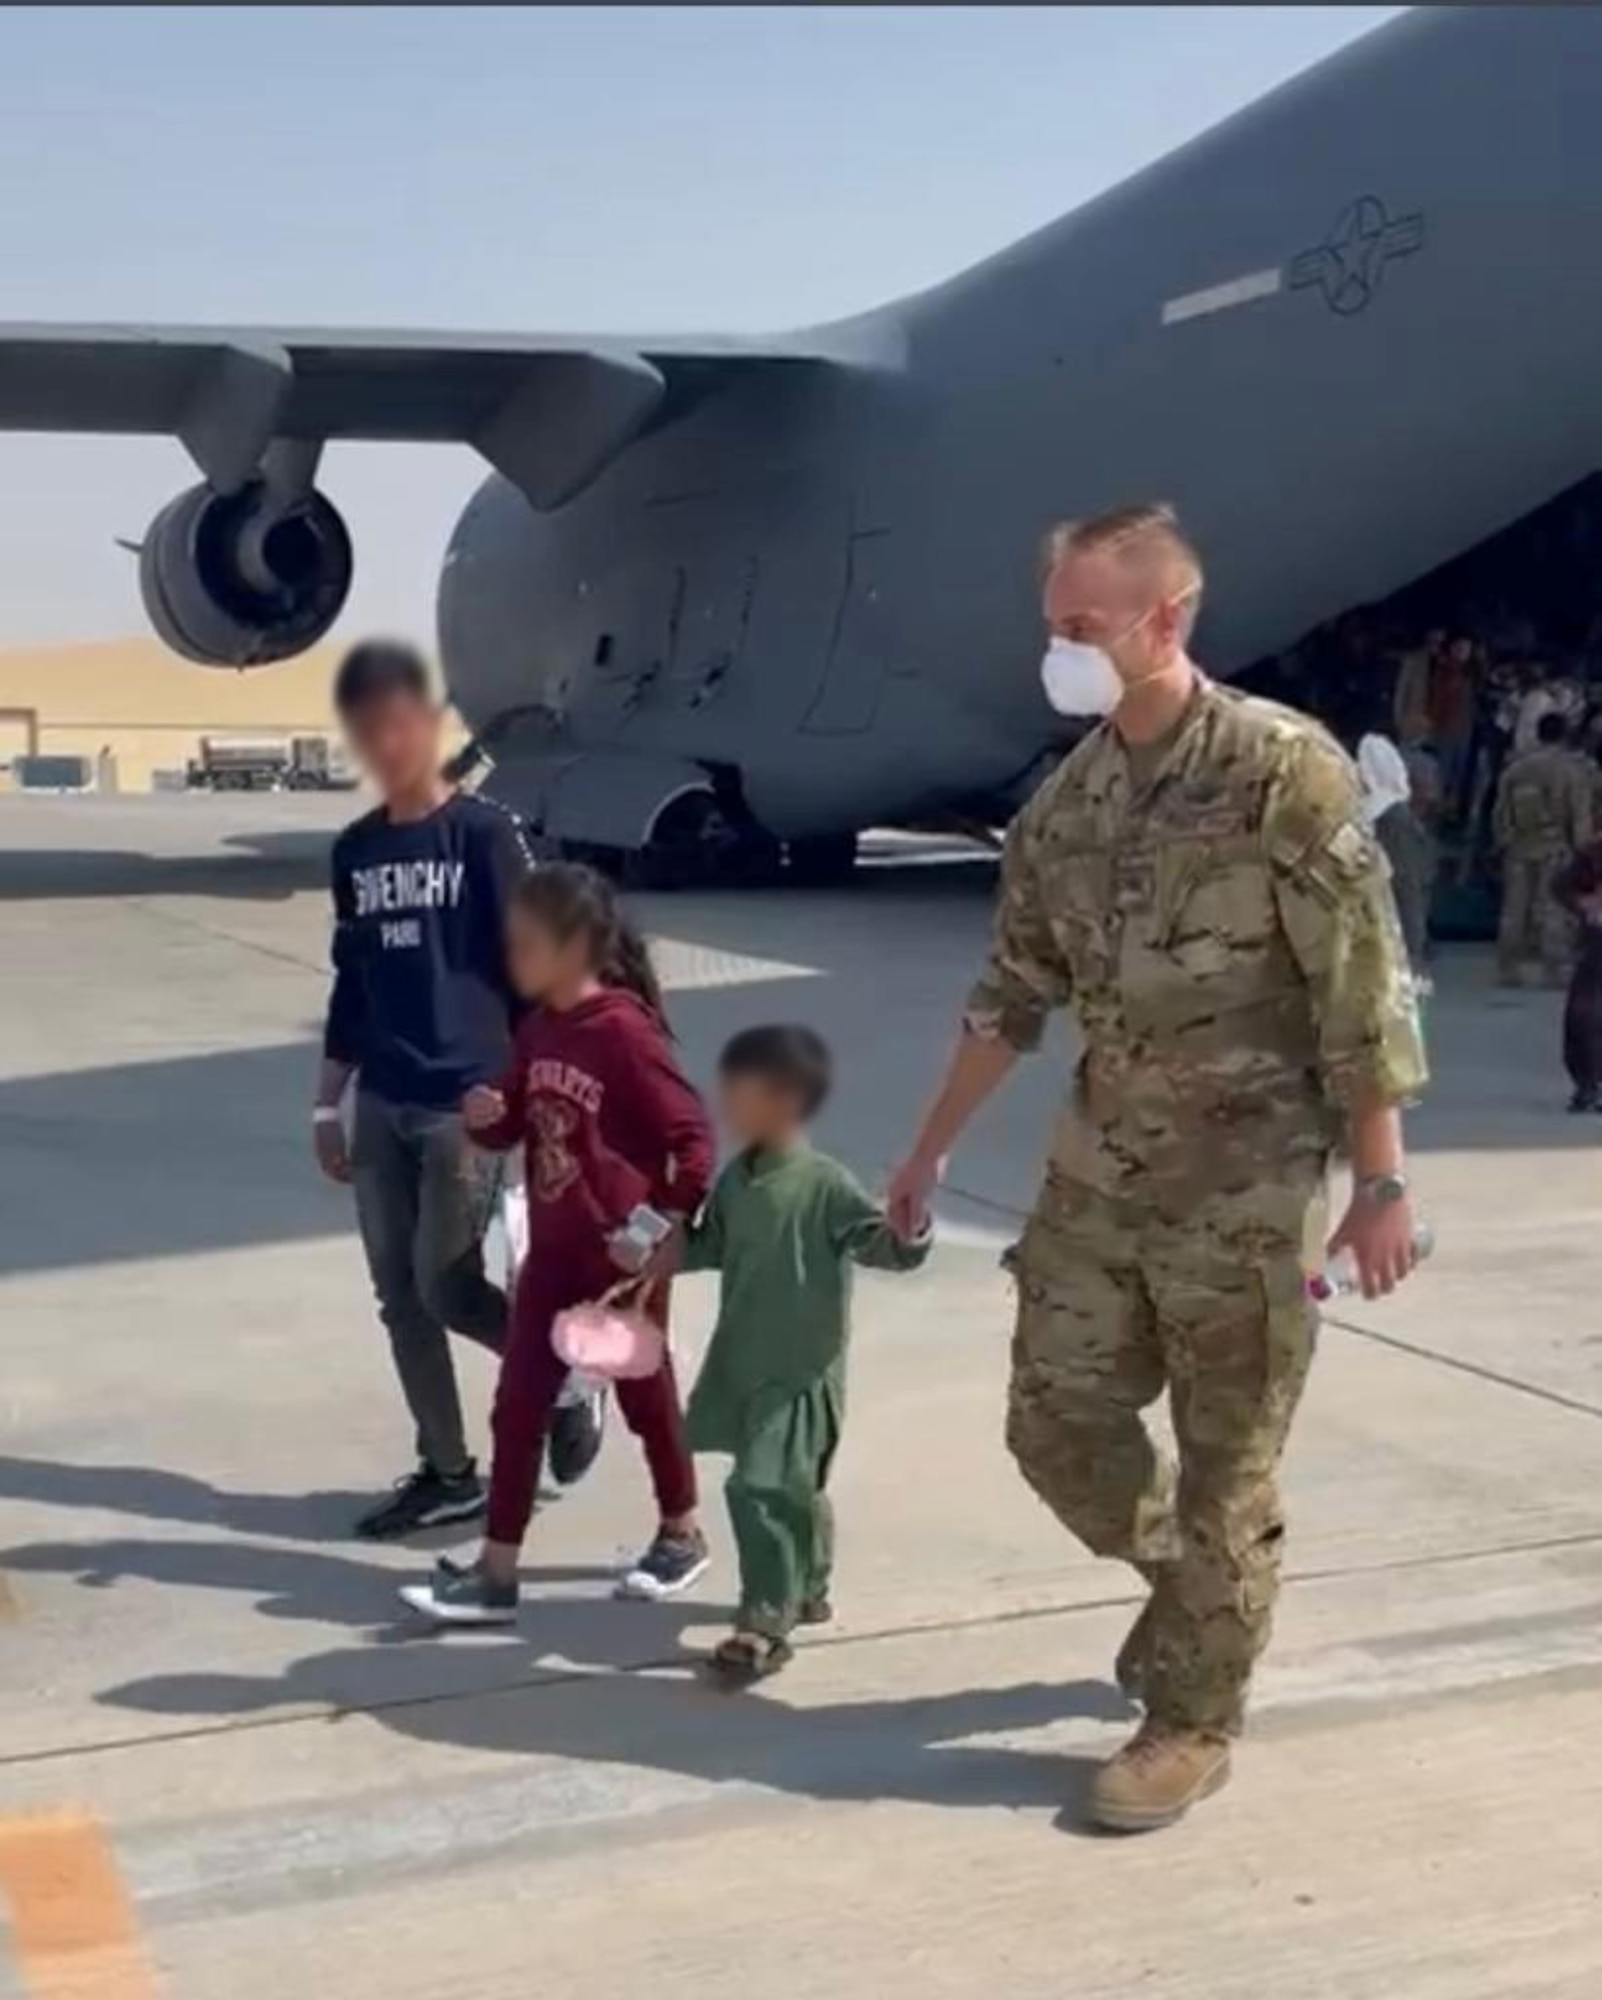 U.S. Air Force Maj. Benjamin Schmidt, a KC-135 Stratotanker evaluator pilot assigned to the 91st Air Refueling Squadron (ARS), walks with children from Afghanistan, Aug. 28, 2021, at Al Udeid Air Base, Qatar.